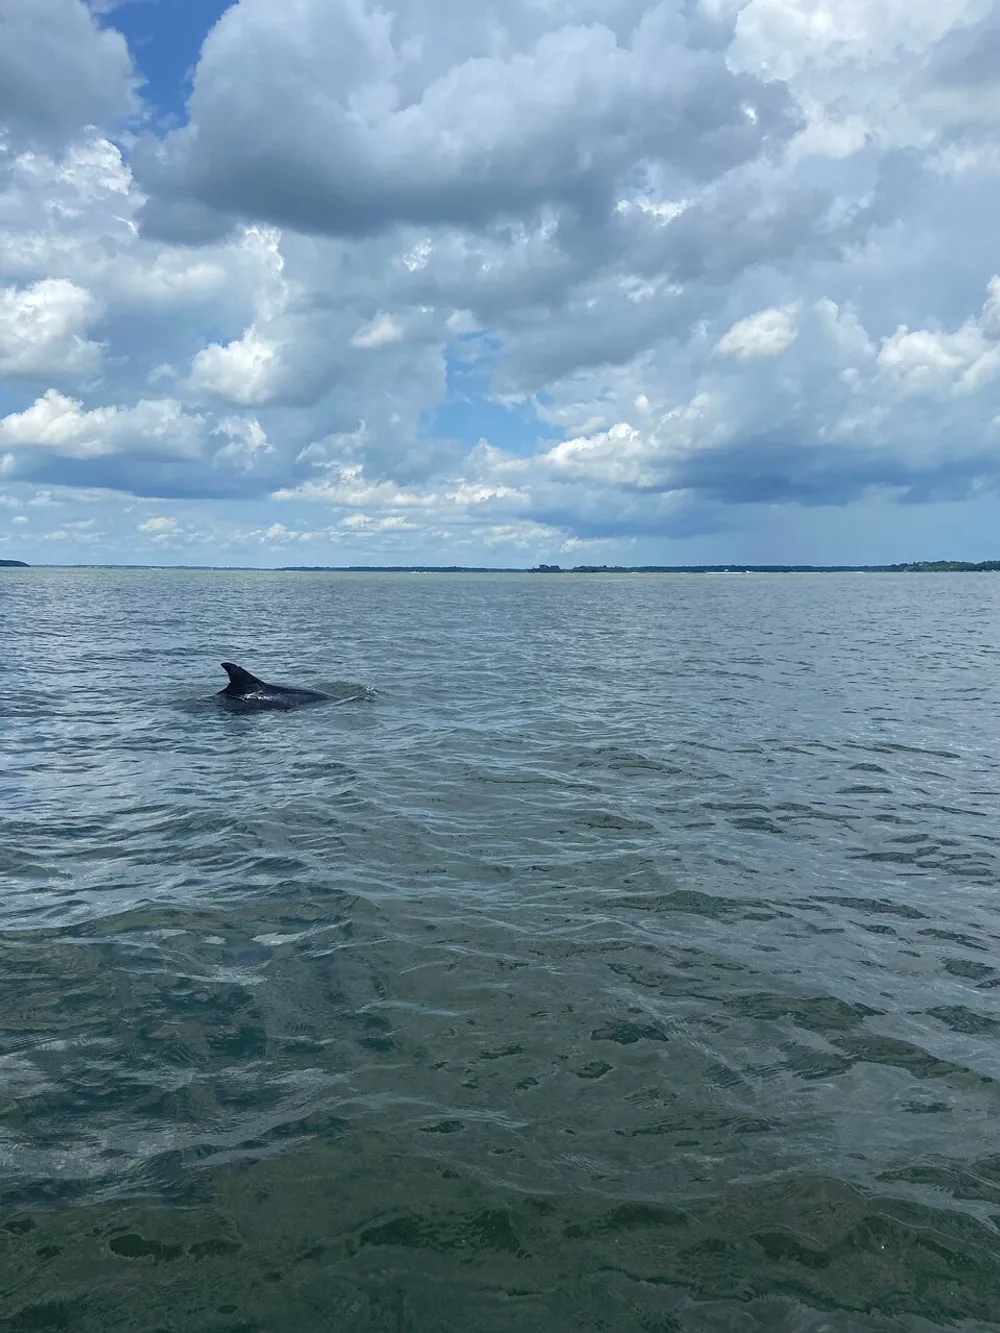 The image depicts a serene seascape under a cloudy sky with the dorsal fin of a marine animal possibly a dolphin or a shark peeking out of the water